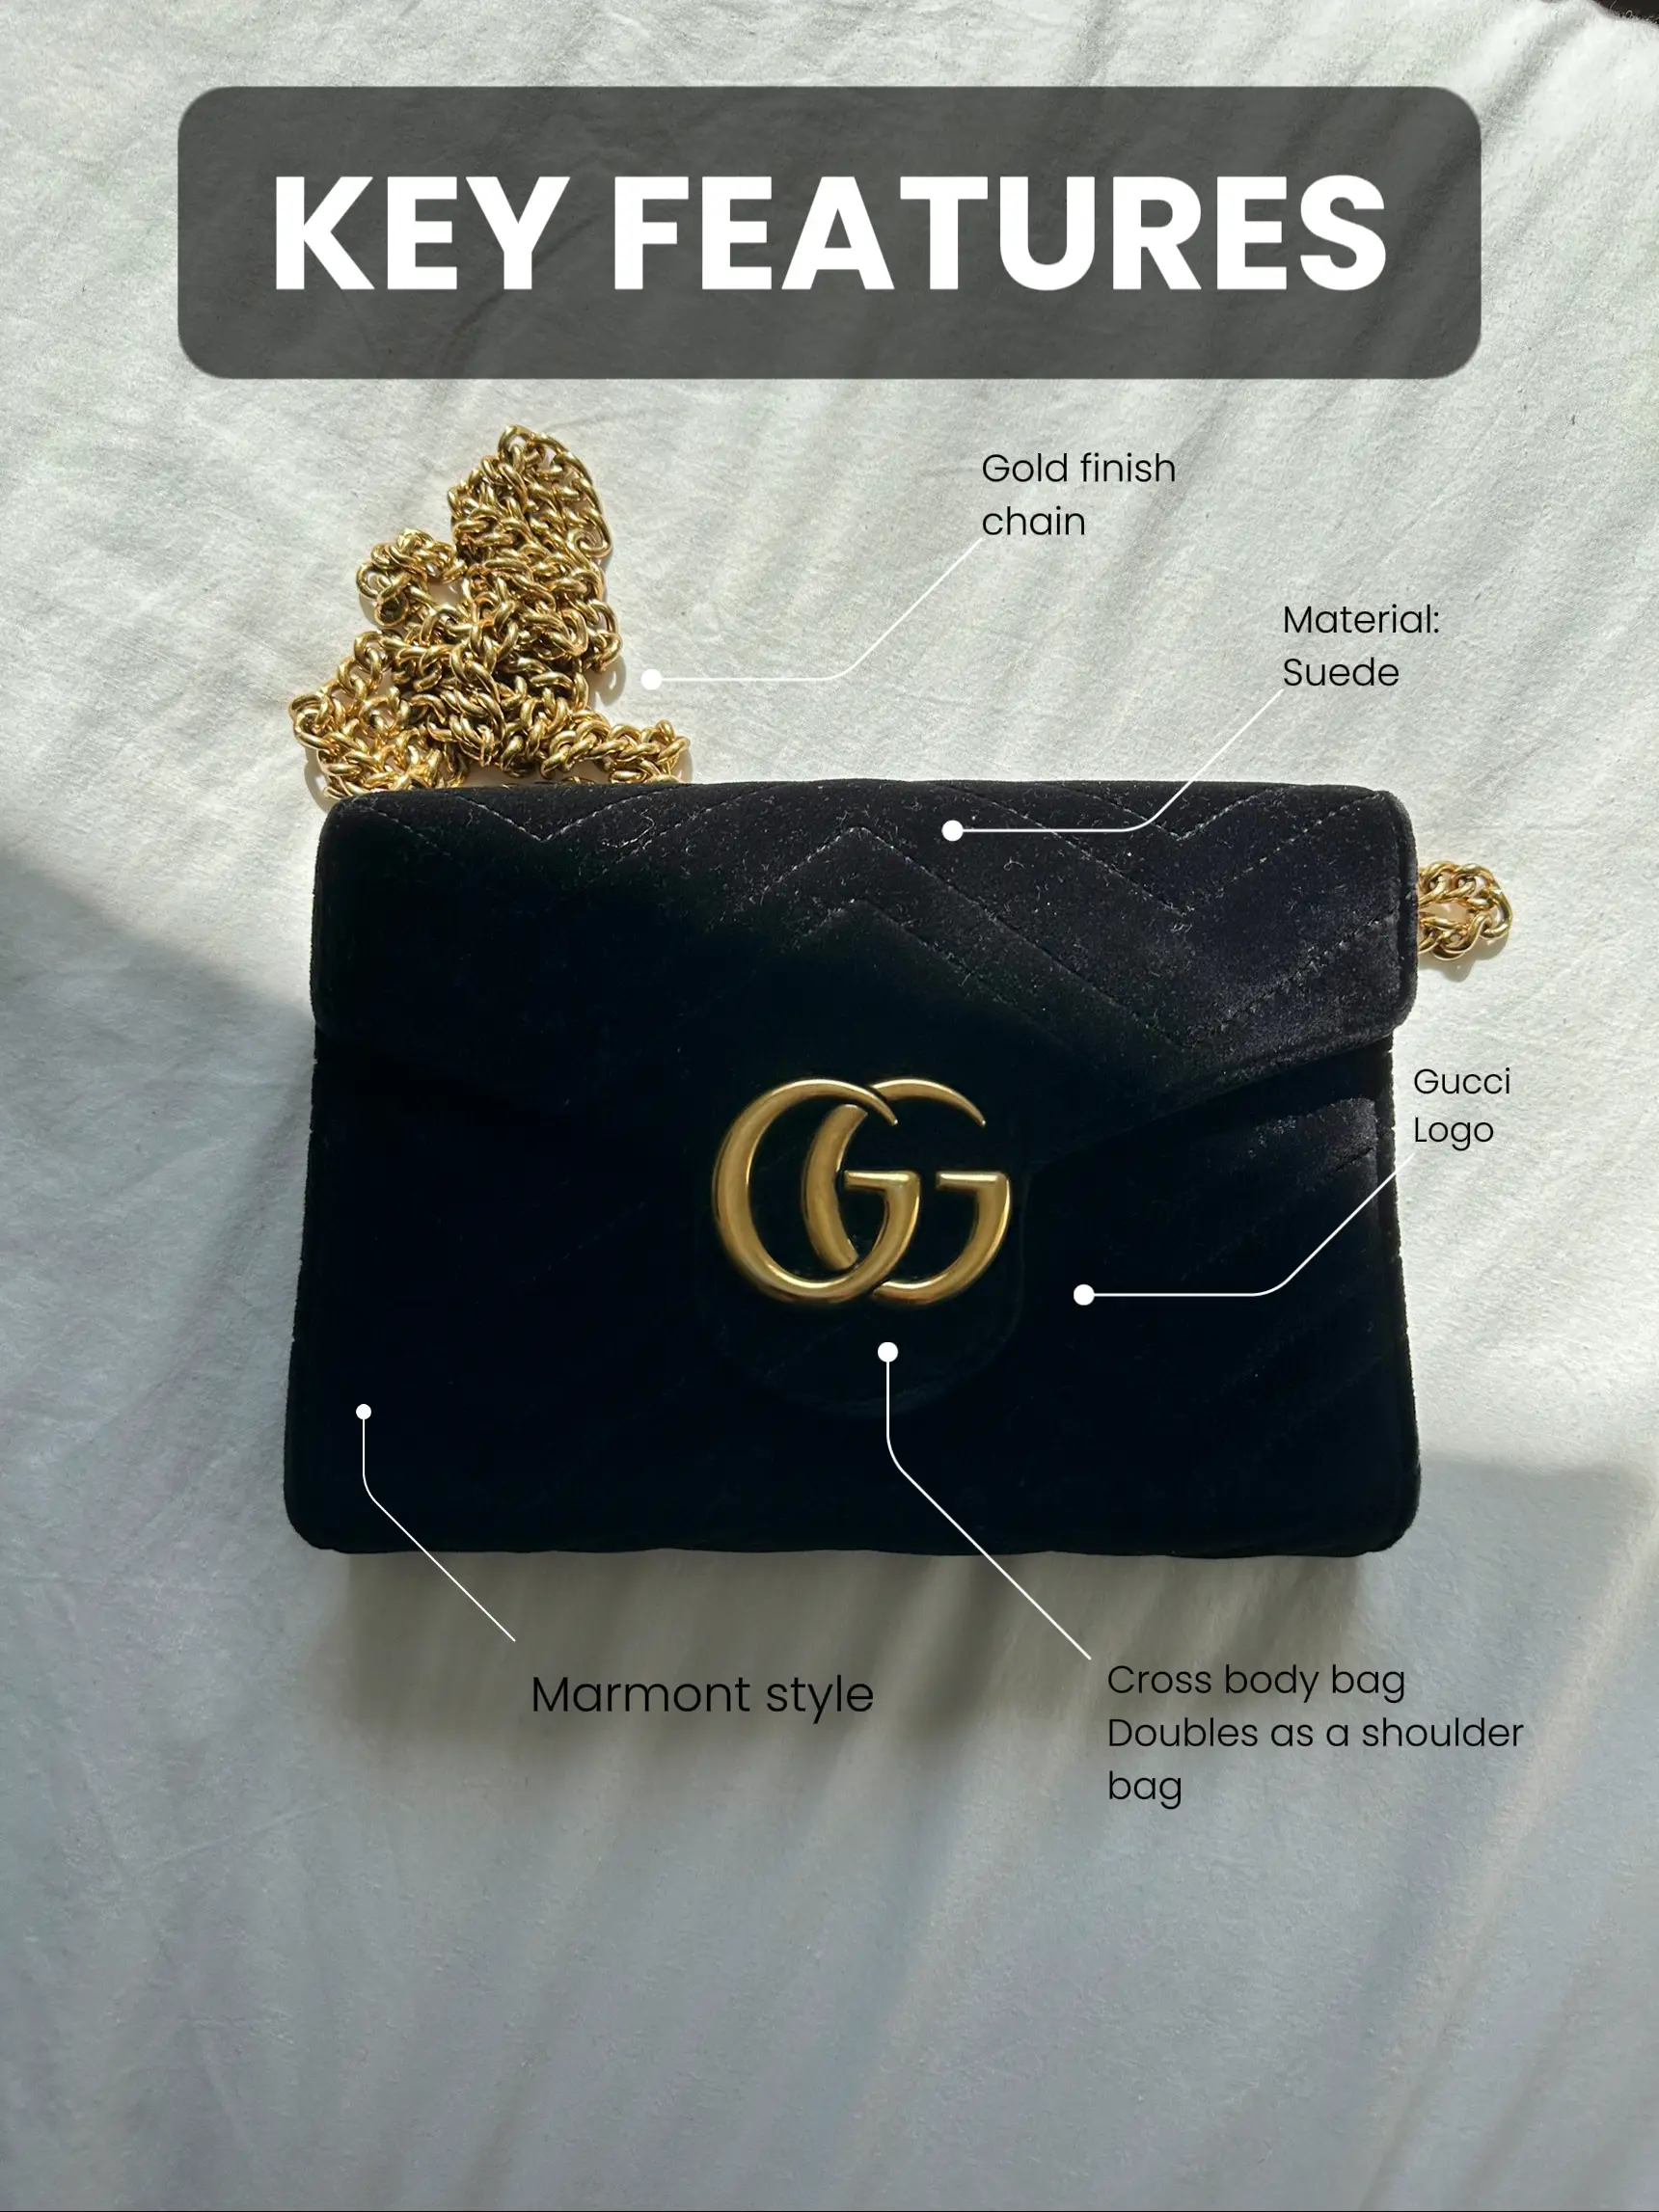 GUCCI MARMONT BAG REVIEW  IS IT WORTH THE HYPE?! 